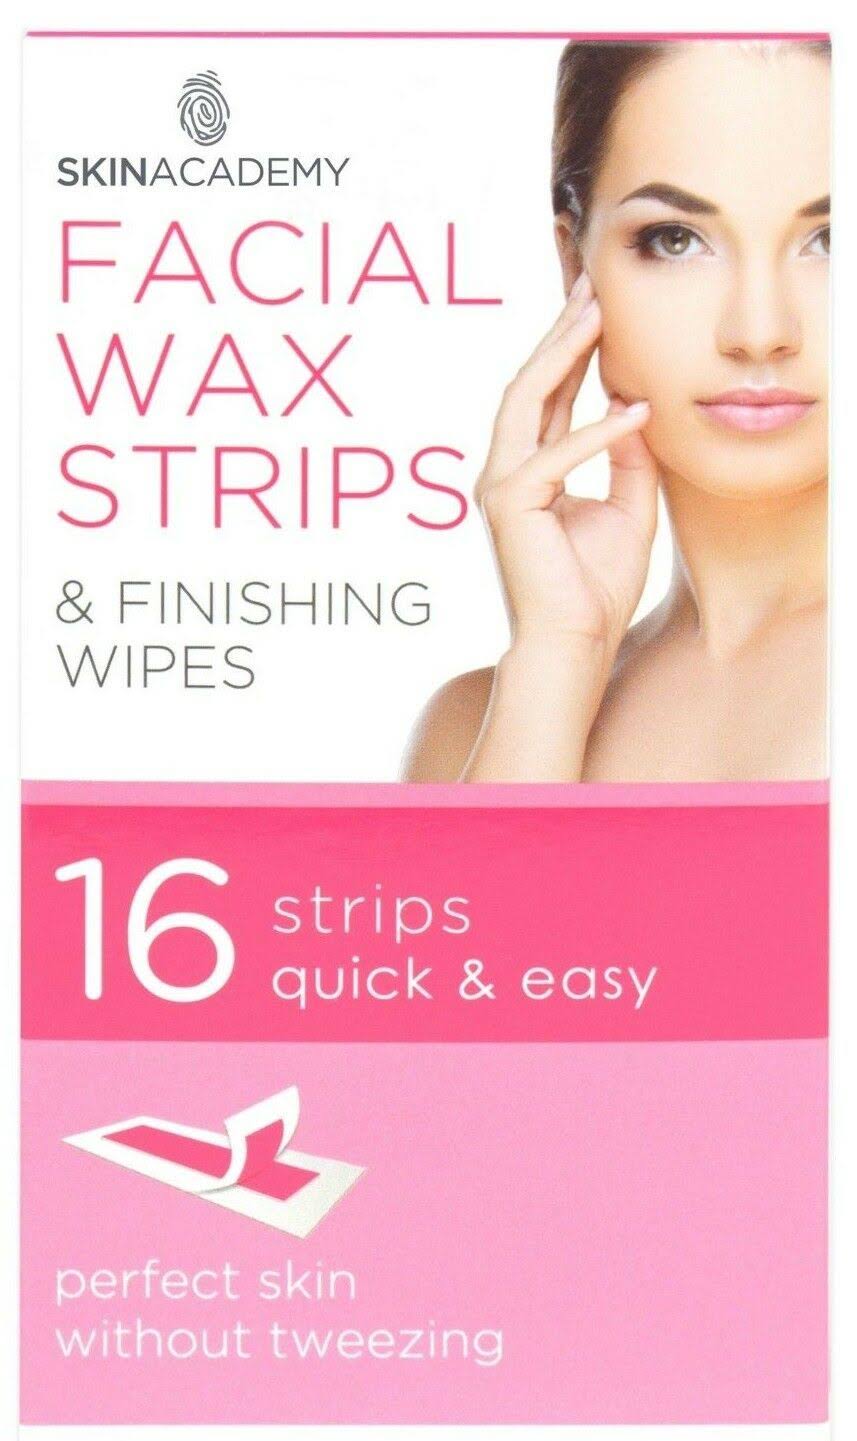 Pretty Facial Wax Strips and Finishing Wipes - 16 Facial Wax Strips and Finishing Wipes